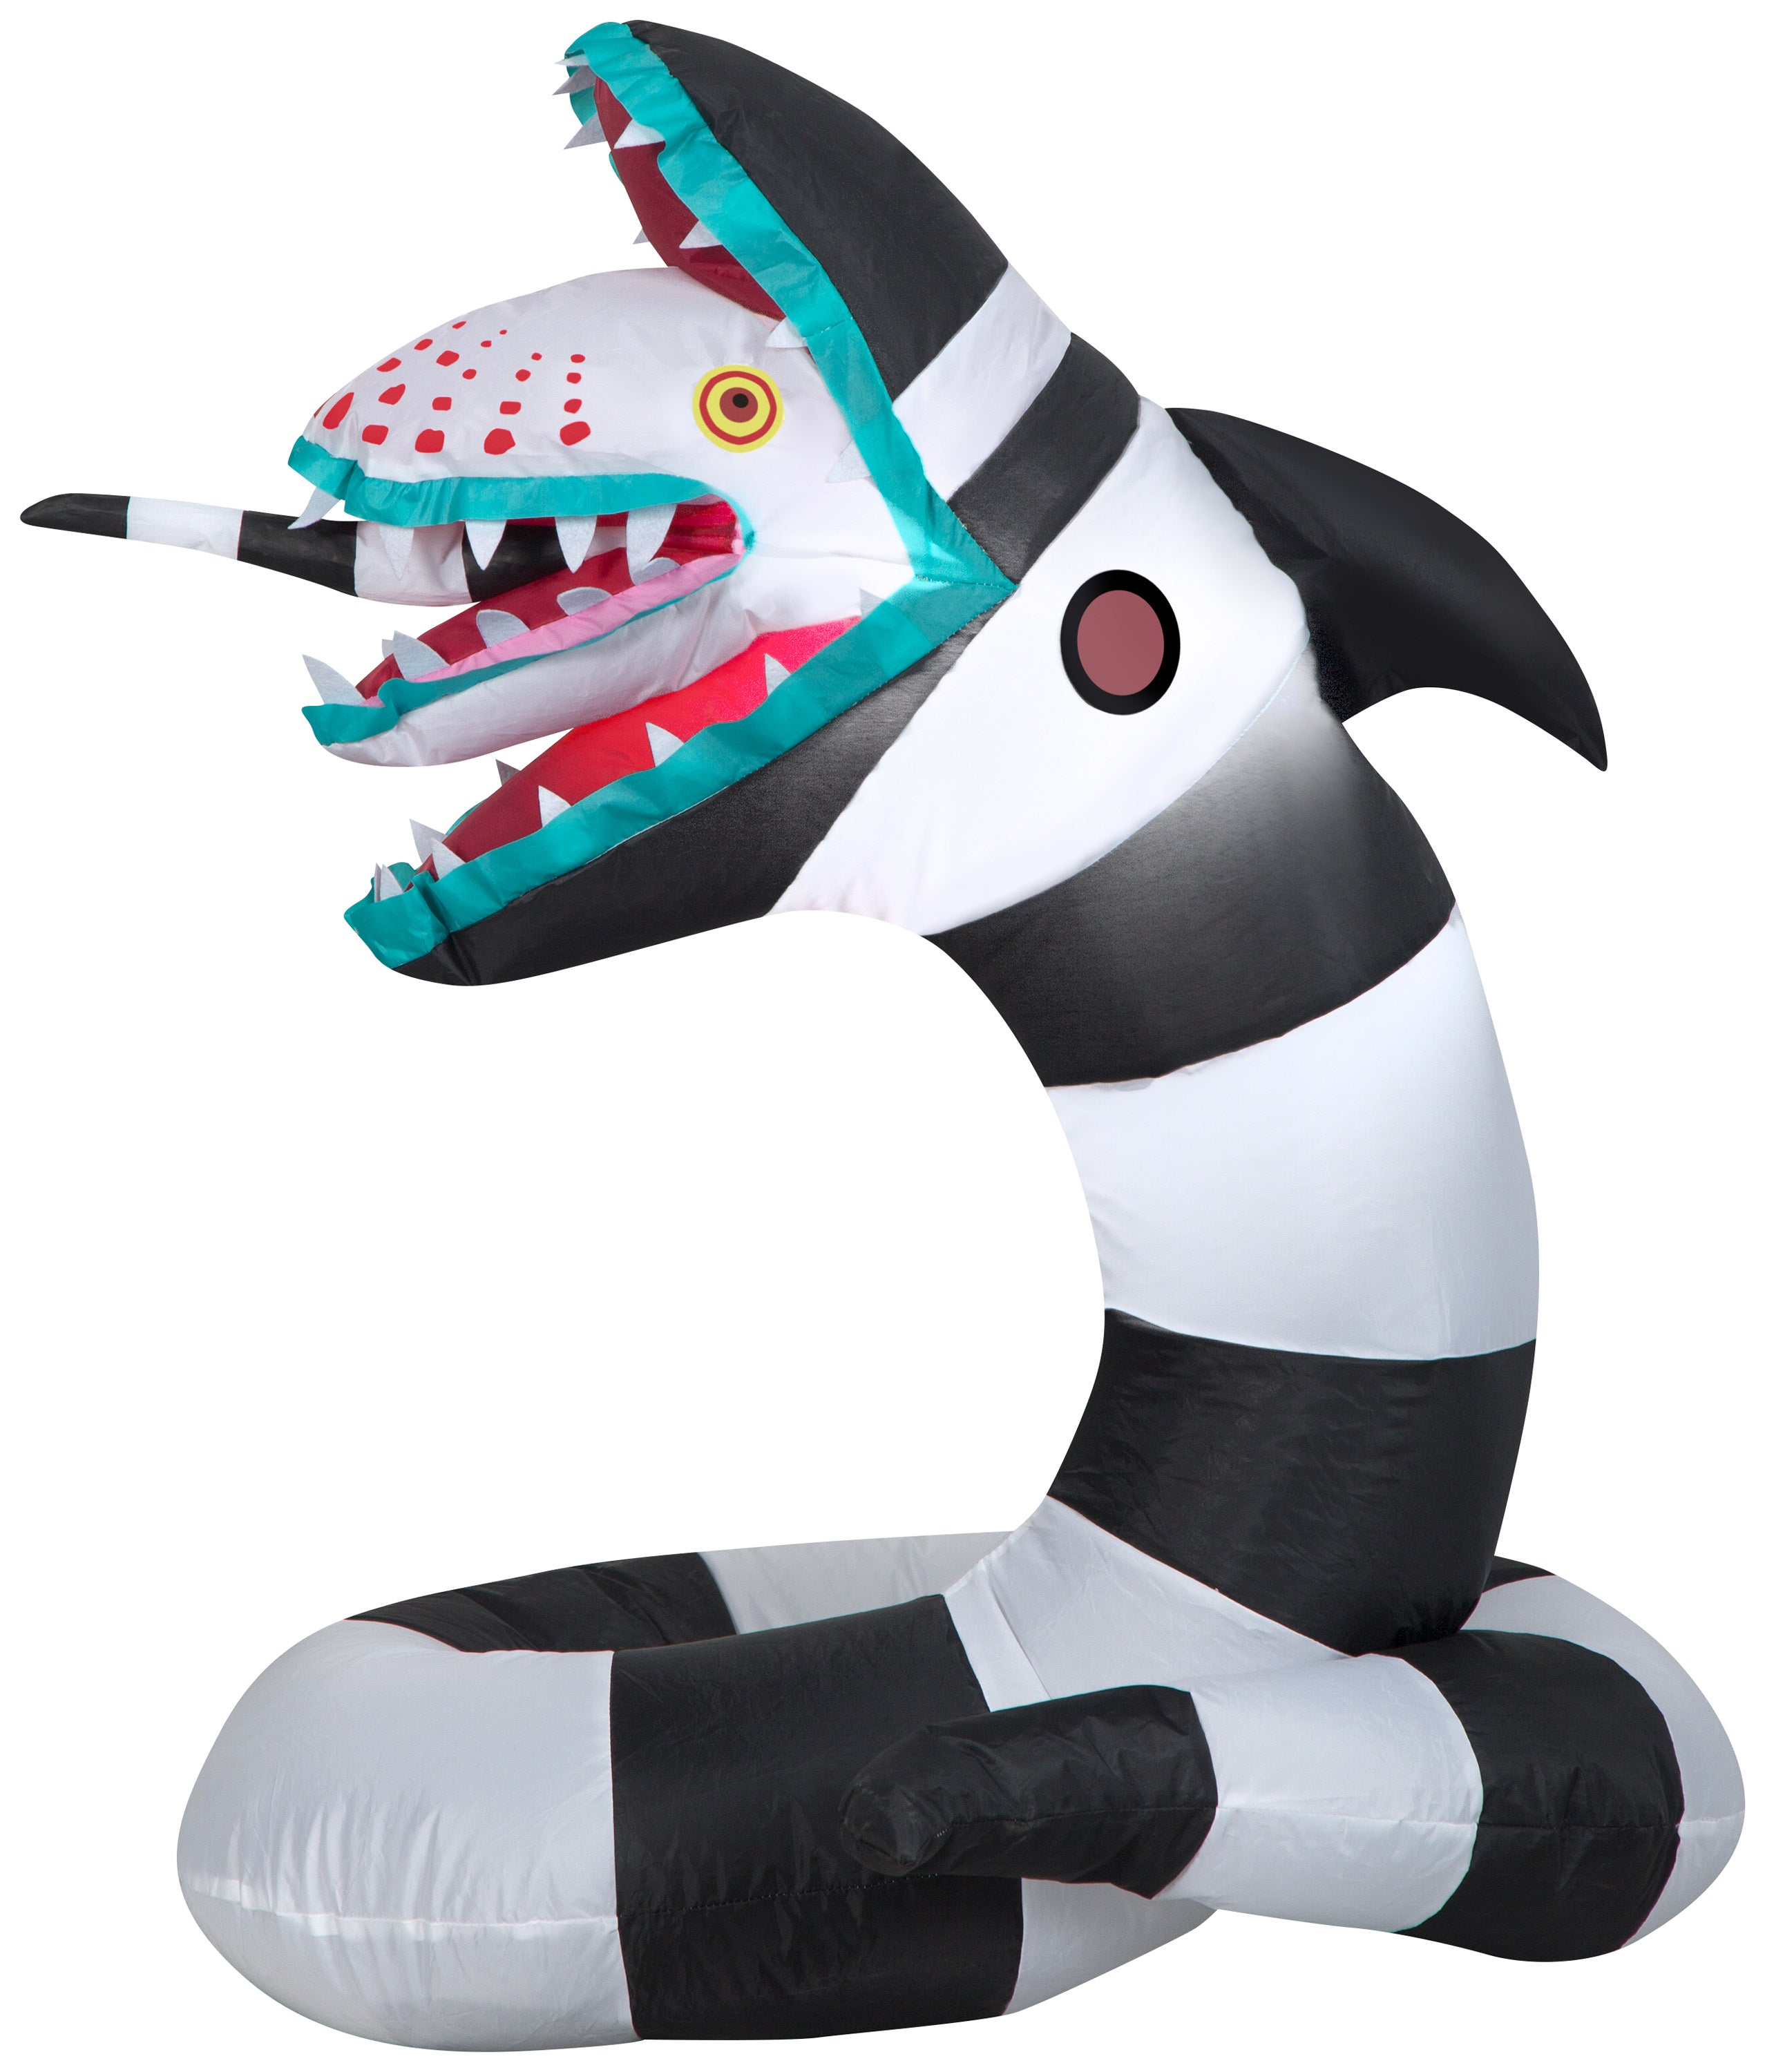 Gemmy Airblown Inflatable Beetlejuice Sandworm, 3 ft Tall, Multicolored